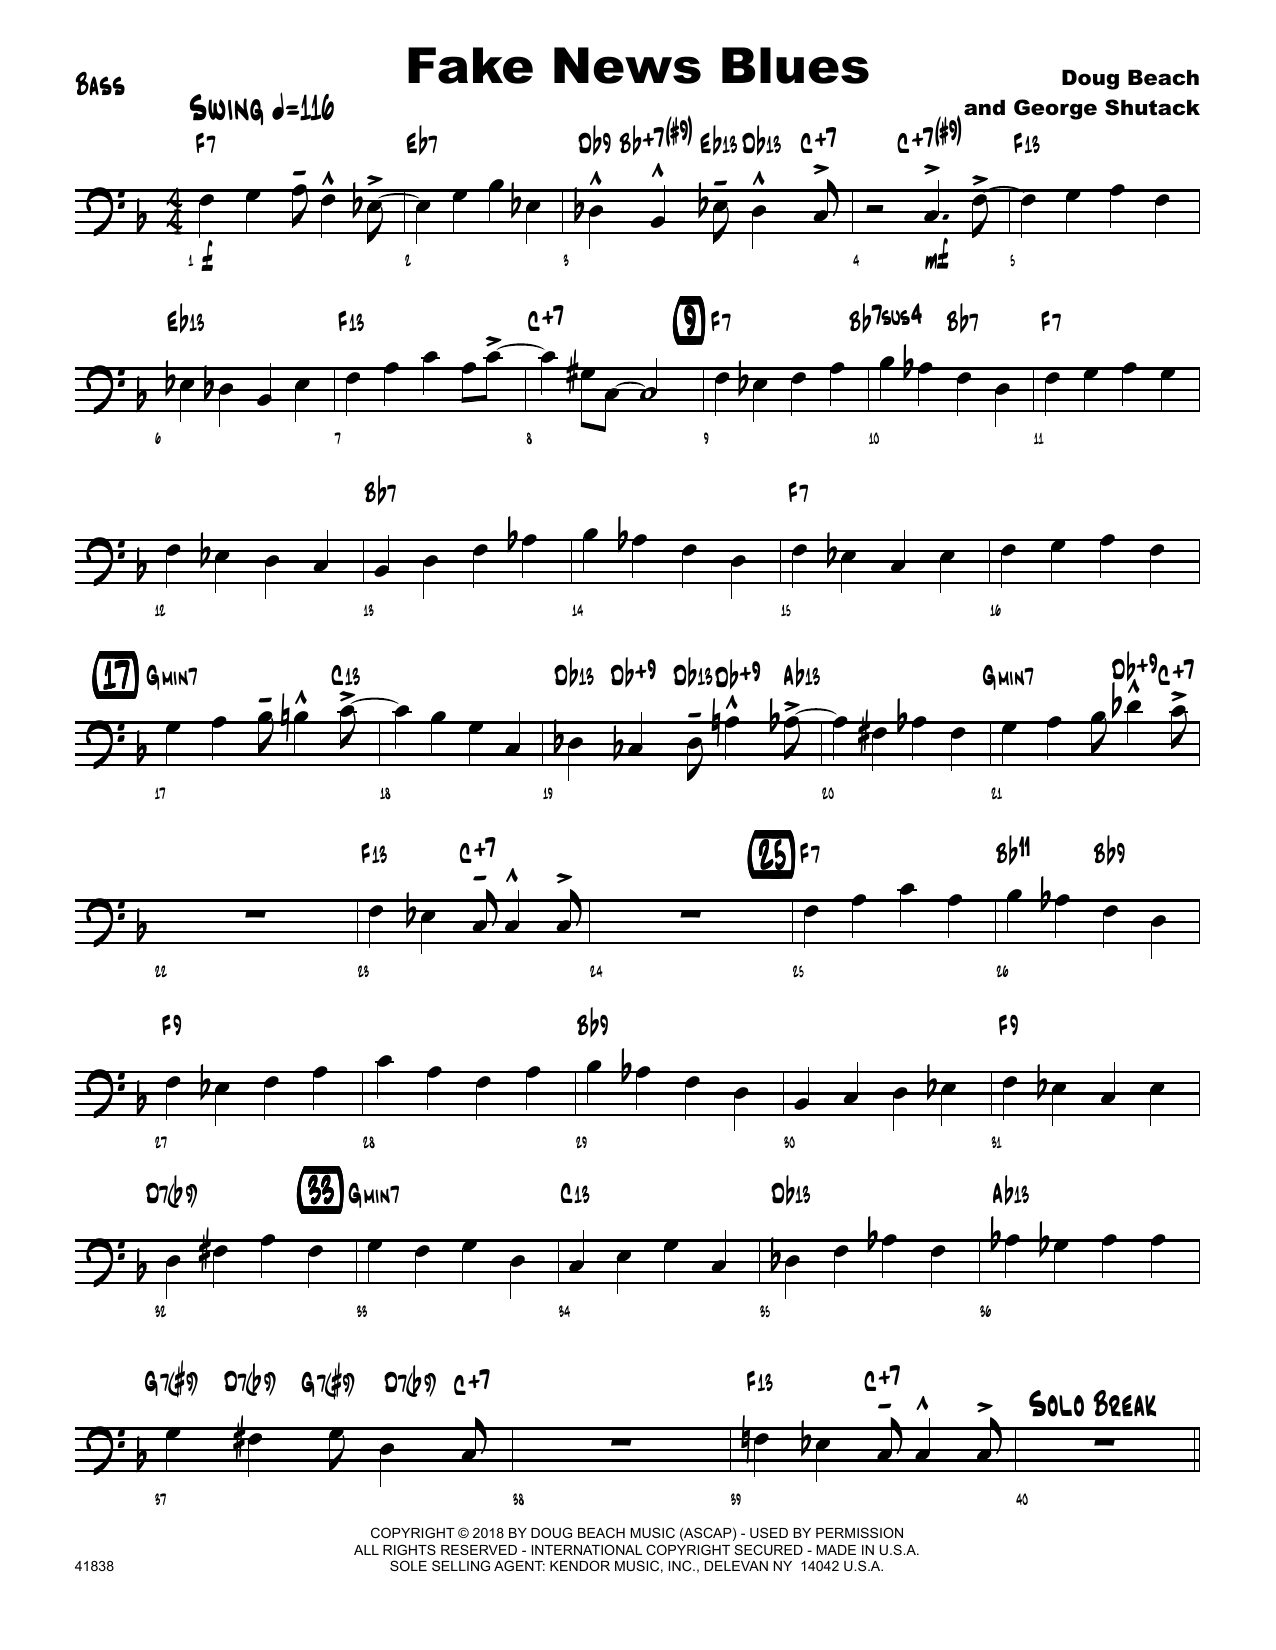 Doug Beach Fake News Blues - Bass sheet music preview music notes and score for Jazz Ensemble including 2 page(s)